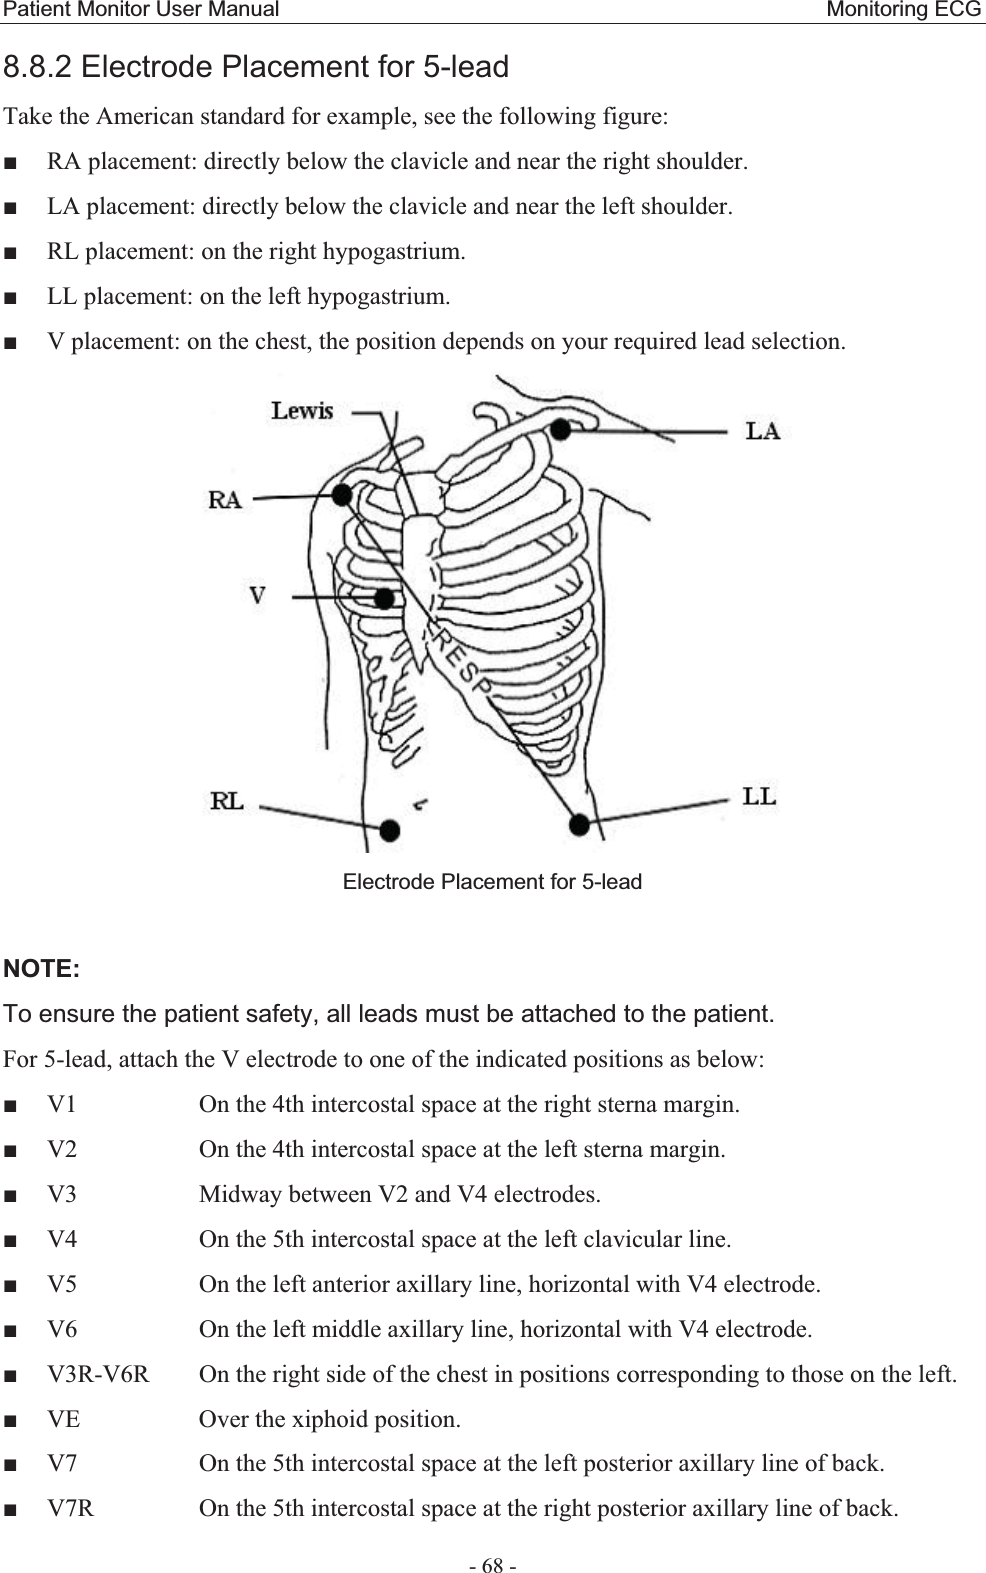 Patient Monitor User Manual                                                  Monitoring ECG  - 68 - 8.8.2 Electrode Placement for 5-lead Take the American standard for example, see the following figure:  RA placement: directly below the clavicle and near the right shoulder.  LA placement: directly below the clavicle and near the left shoulder.  RL placement: on the right hypogastrium.  LL placement: on the left hypogastrium.  V placement: on the chest, the position depends on your required lead selection.  Electrode Placement for 5-lead   NOTE:To ensure the patient safety, all leads must be attached to the patient.   For 5-lead, attach the V electrode to one of the indicated positions as below:    V1      On the 4th intercostal space at the right sterna margin.  V2      On the 4th intercostal space at the left sterna margin.  V3      Midway between V2 and V4 electrodes.  V4      On the 5th intercostal space at the left clavicular line.  V5      On the left anterior axillary line, horizontal with V4 electrode.  V6      On the left middle axillary line, horizontal with V4 electrode.  V3R-V6R   On the right side of the chest in positions corresponding to those on the left.  VE      Over the xiphoid position.  V7      On the 5th intercostal space at the left posterior axillary line of back.  V7R     On the 5th intercostal space at the right posterior axillary line of back. 